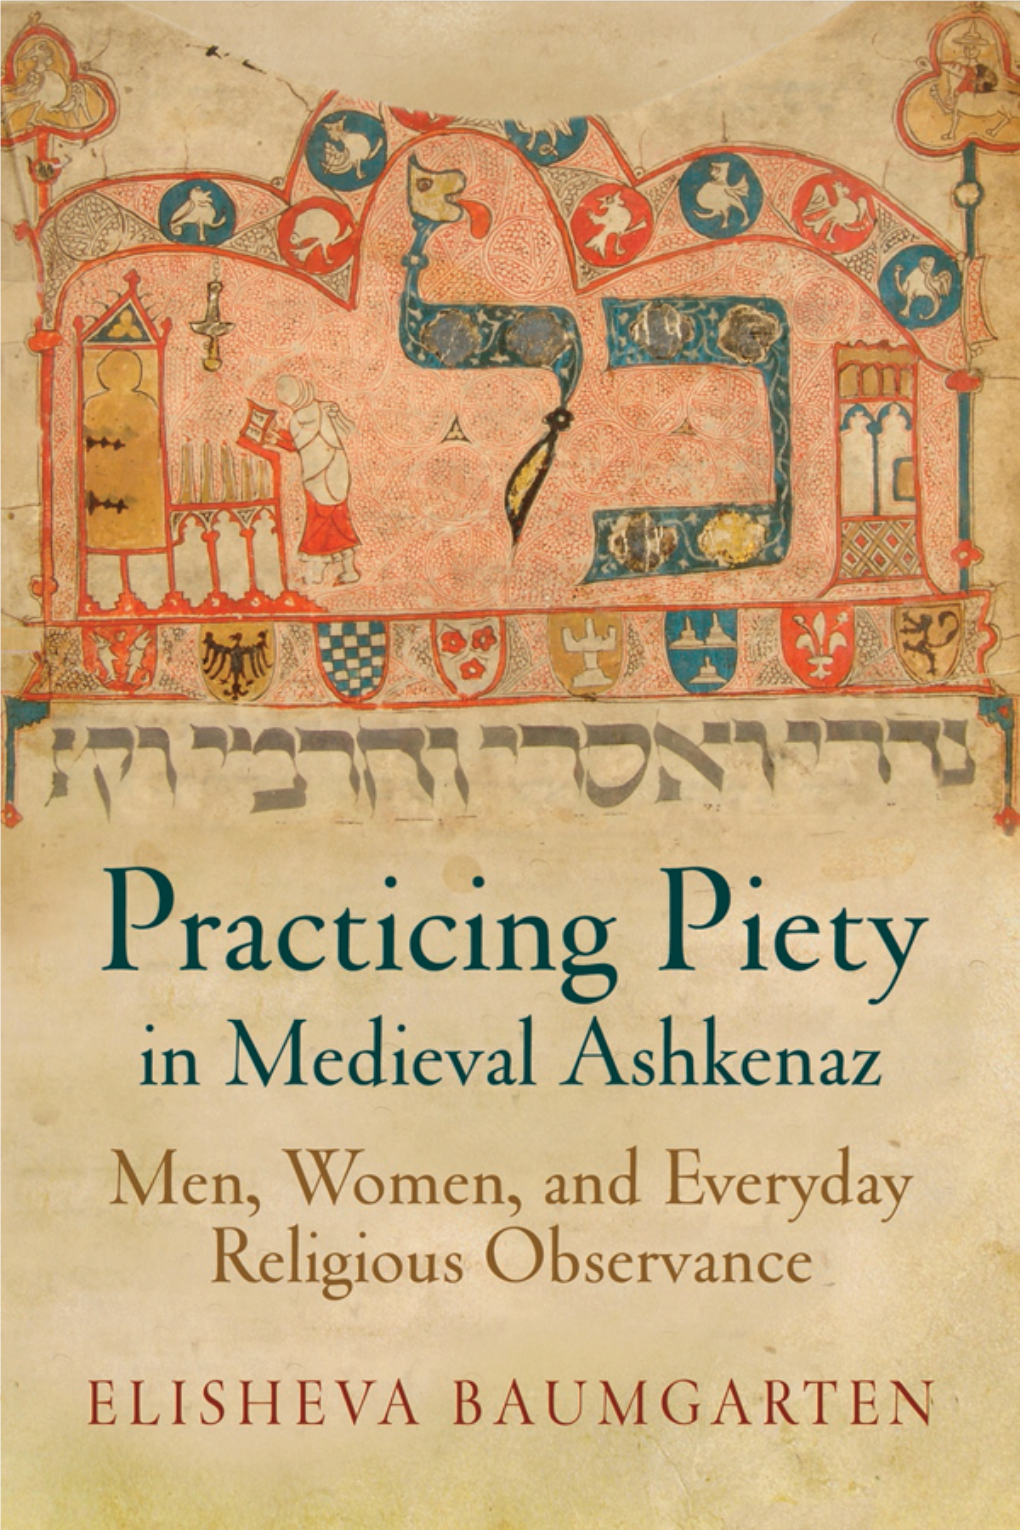 Practicing Piety in Medieval Ashkenaz: Men, Women, and Everyday